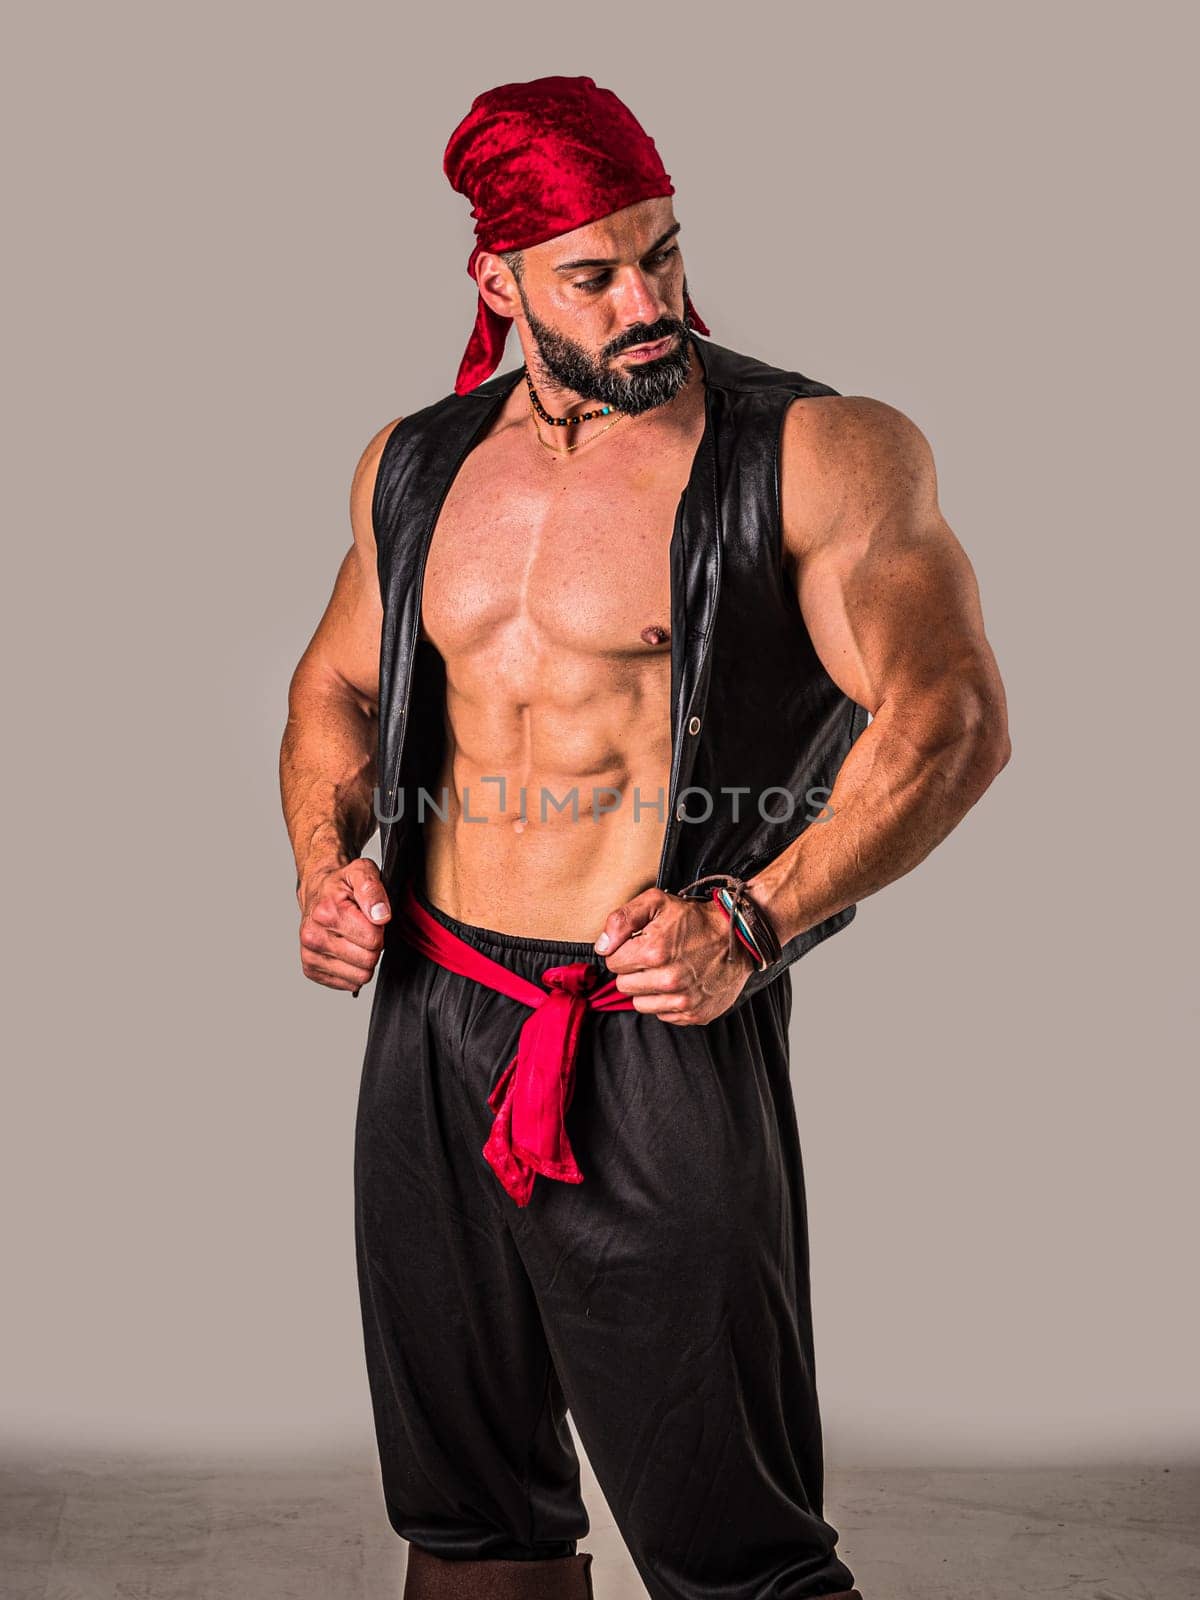 A muscular topless man with a red bandanna and pirate costume, standing in front of a white background. A Brave Soul in Crimson: A Male Bodybuilder with a Red Bandanna Standing Proudly Before a Clean Canvas